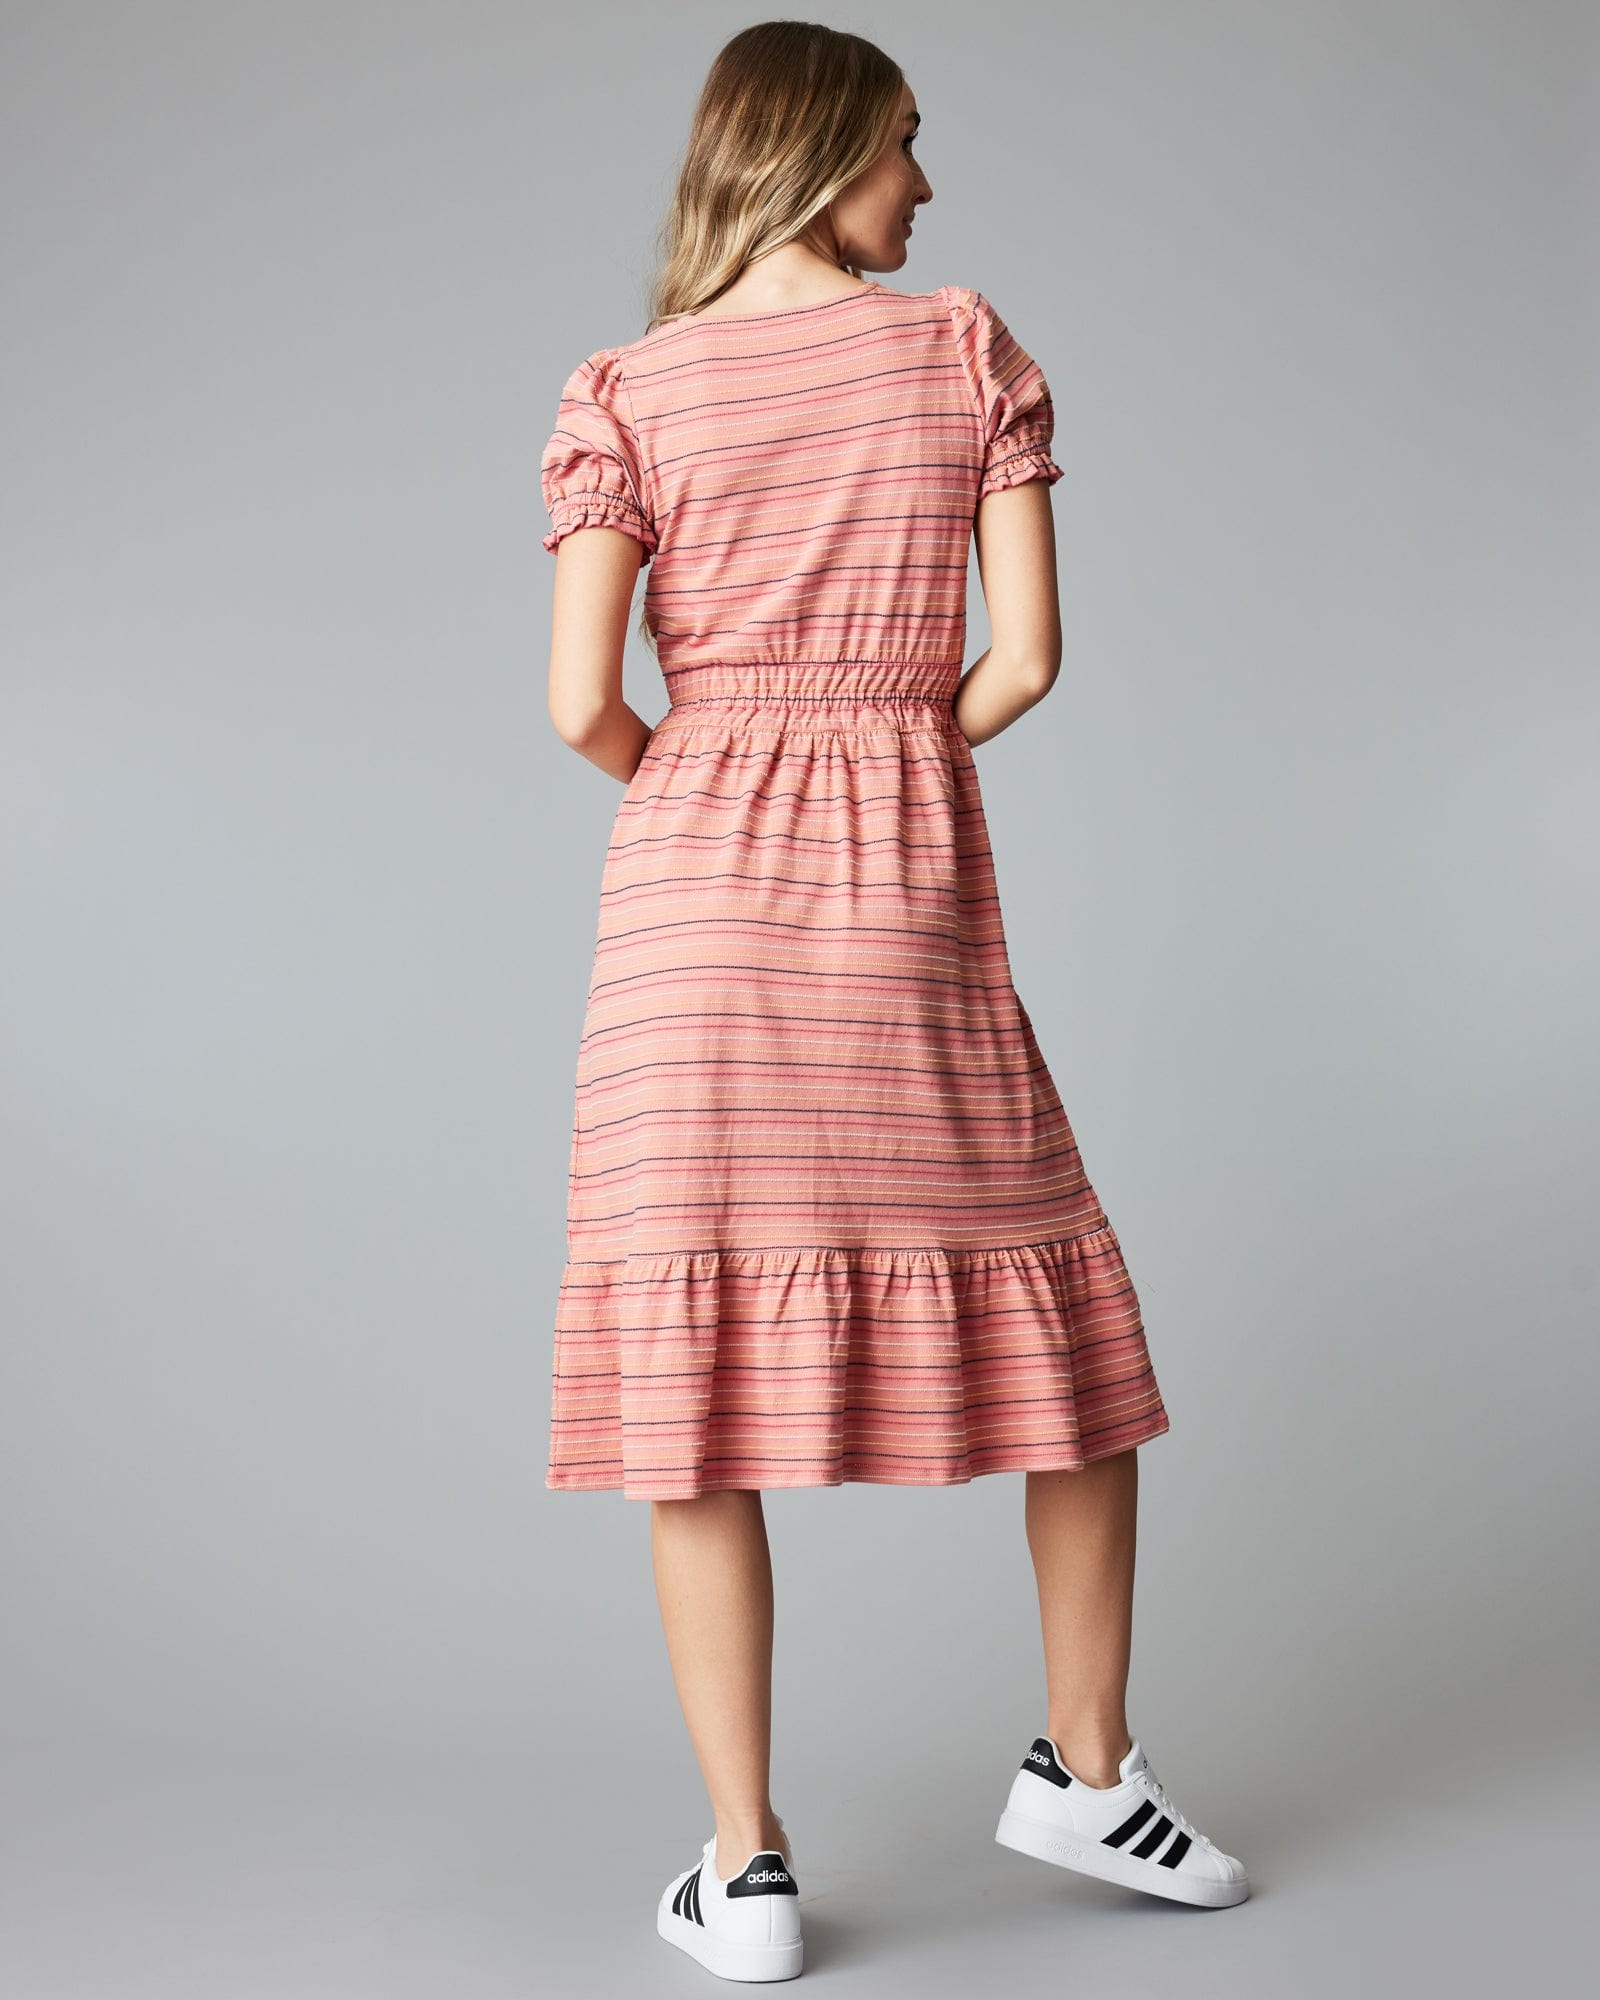 Woman in a short sleeve, striped, pink, midi-length dress